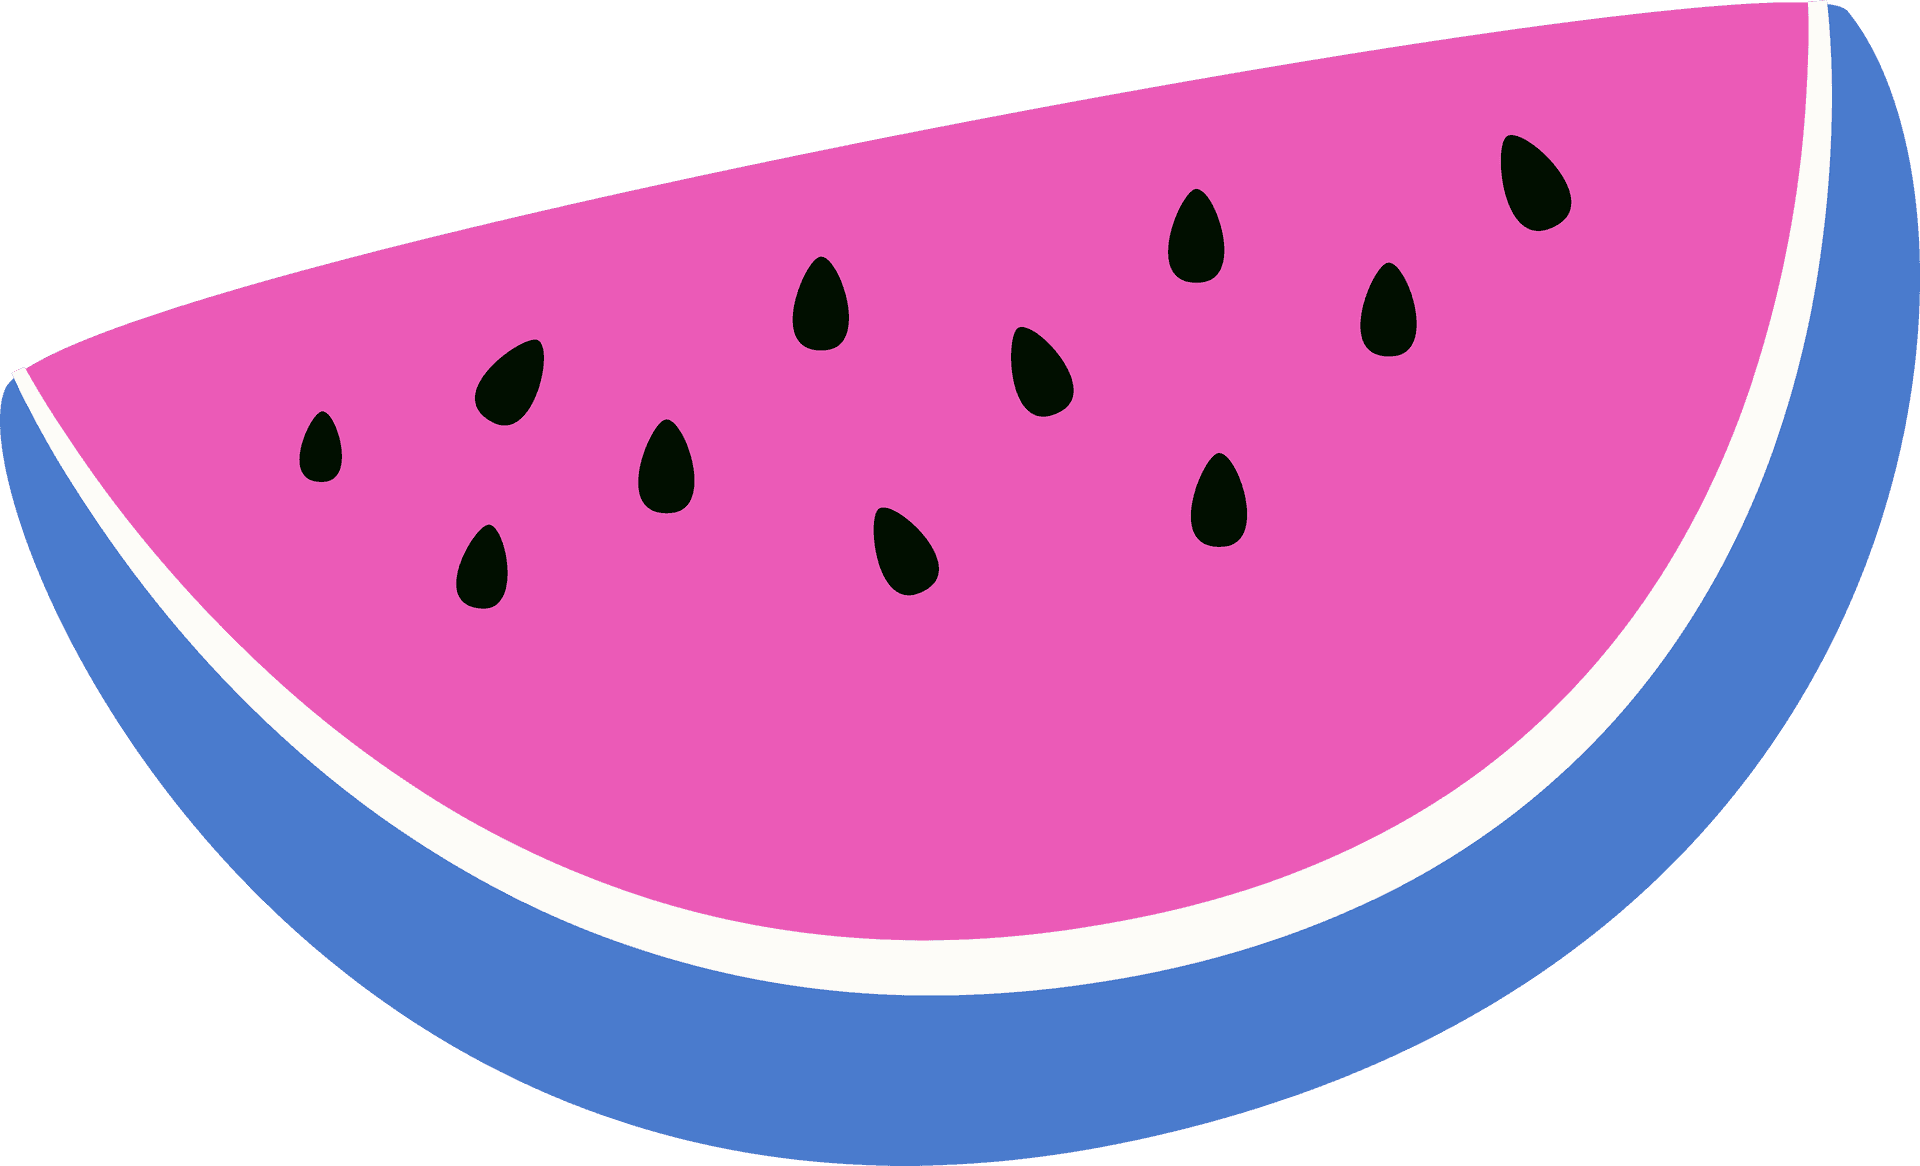 Summer Watermelon Slice Clipart PNG